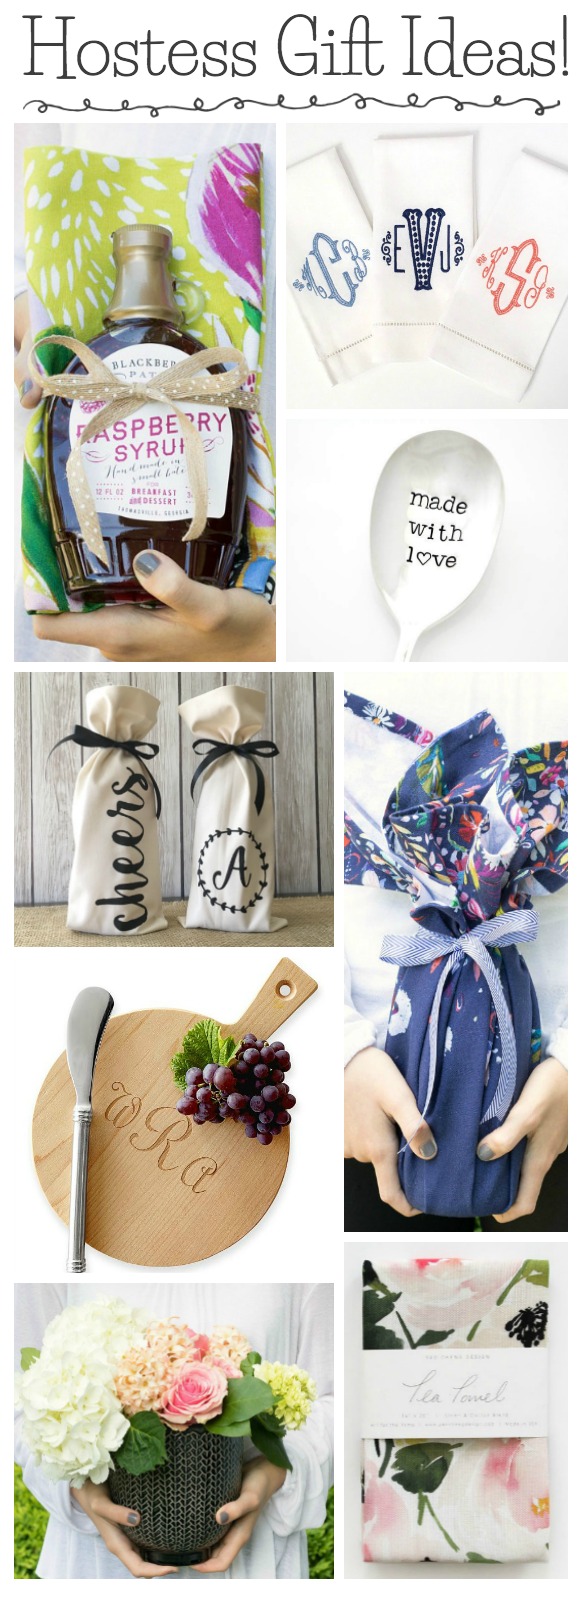 LOVE these simple hostess gift ideas! I'm stocking up before the holidays!